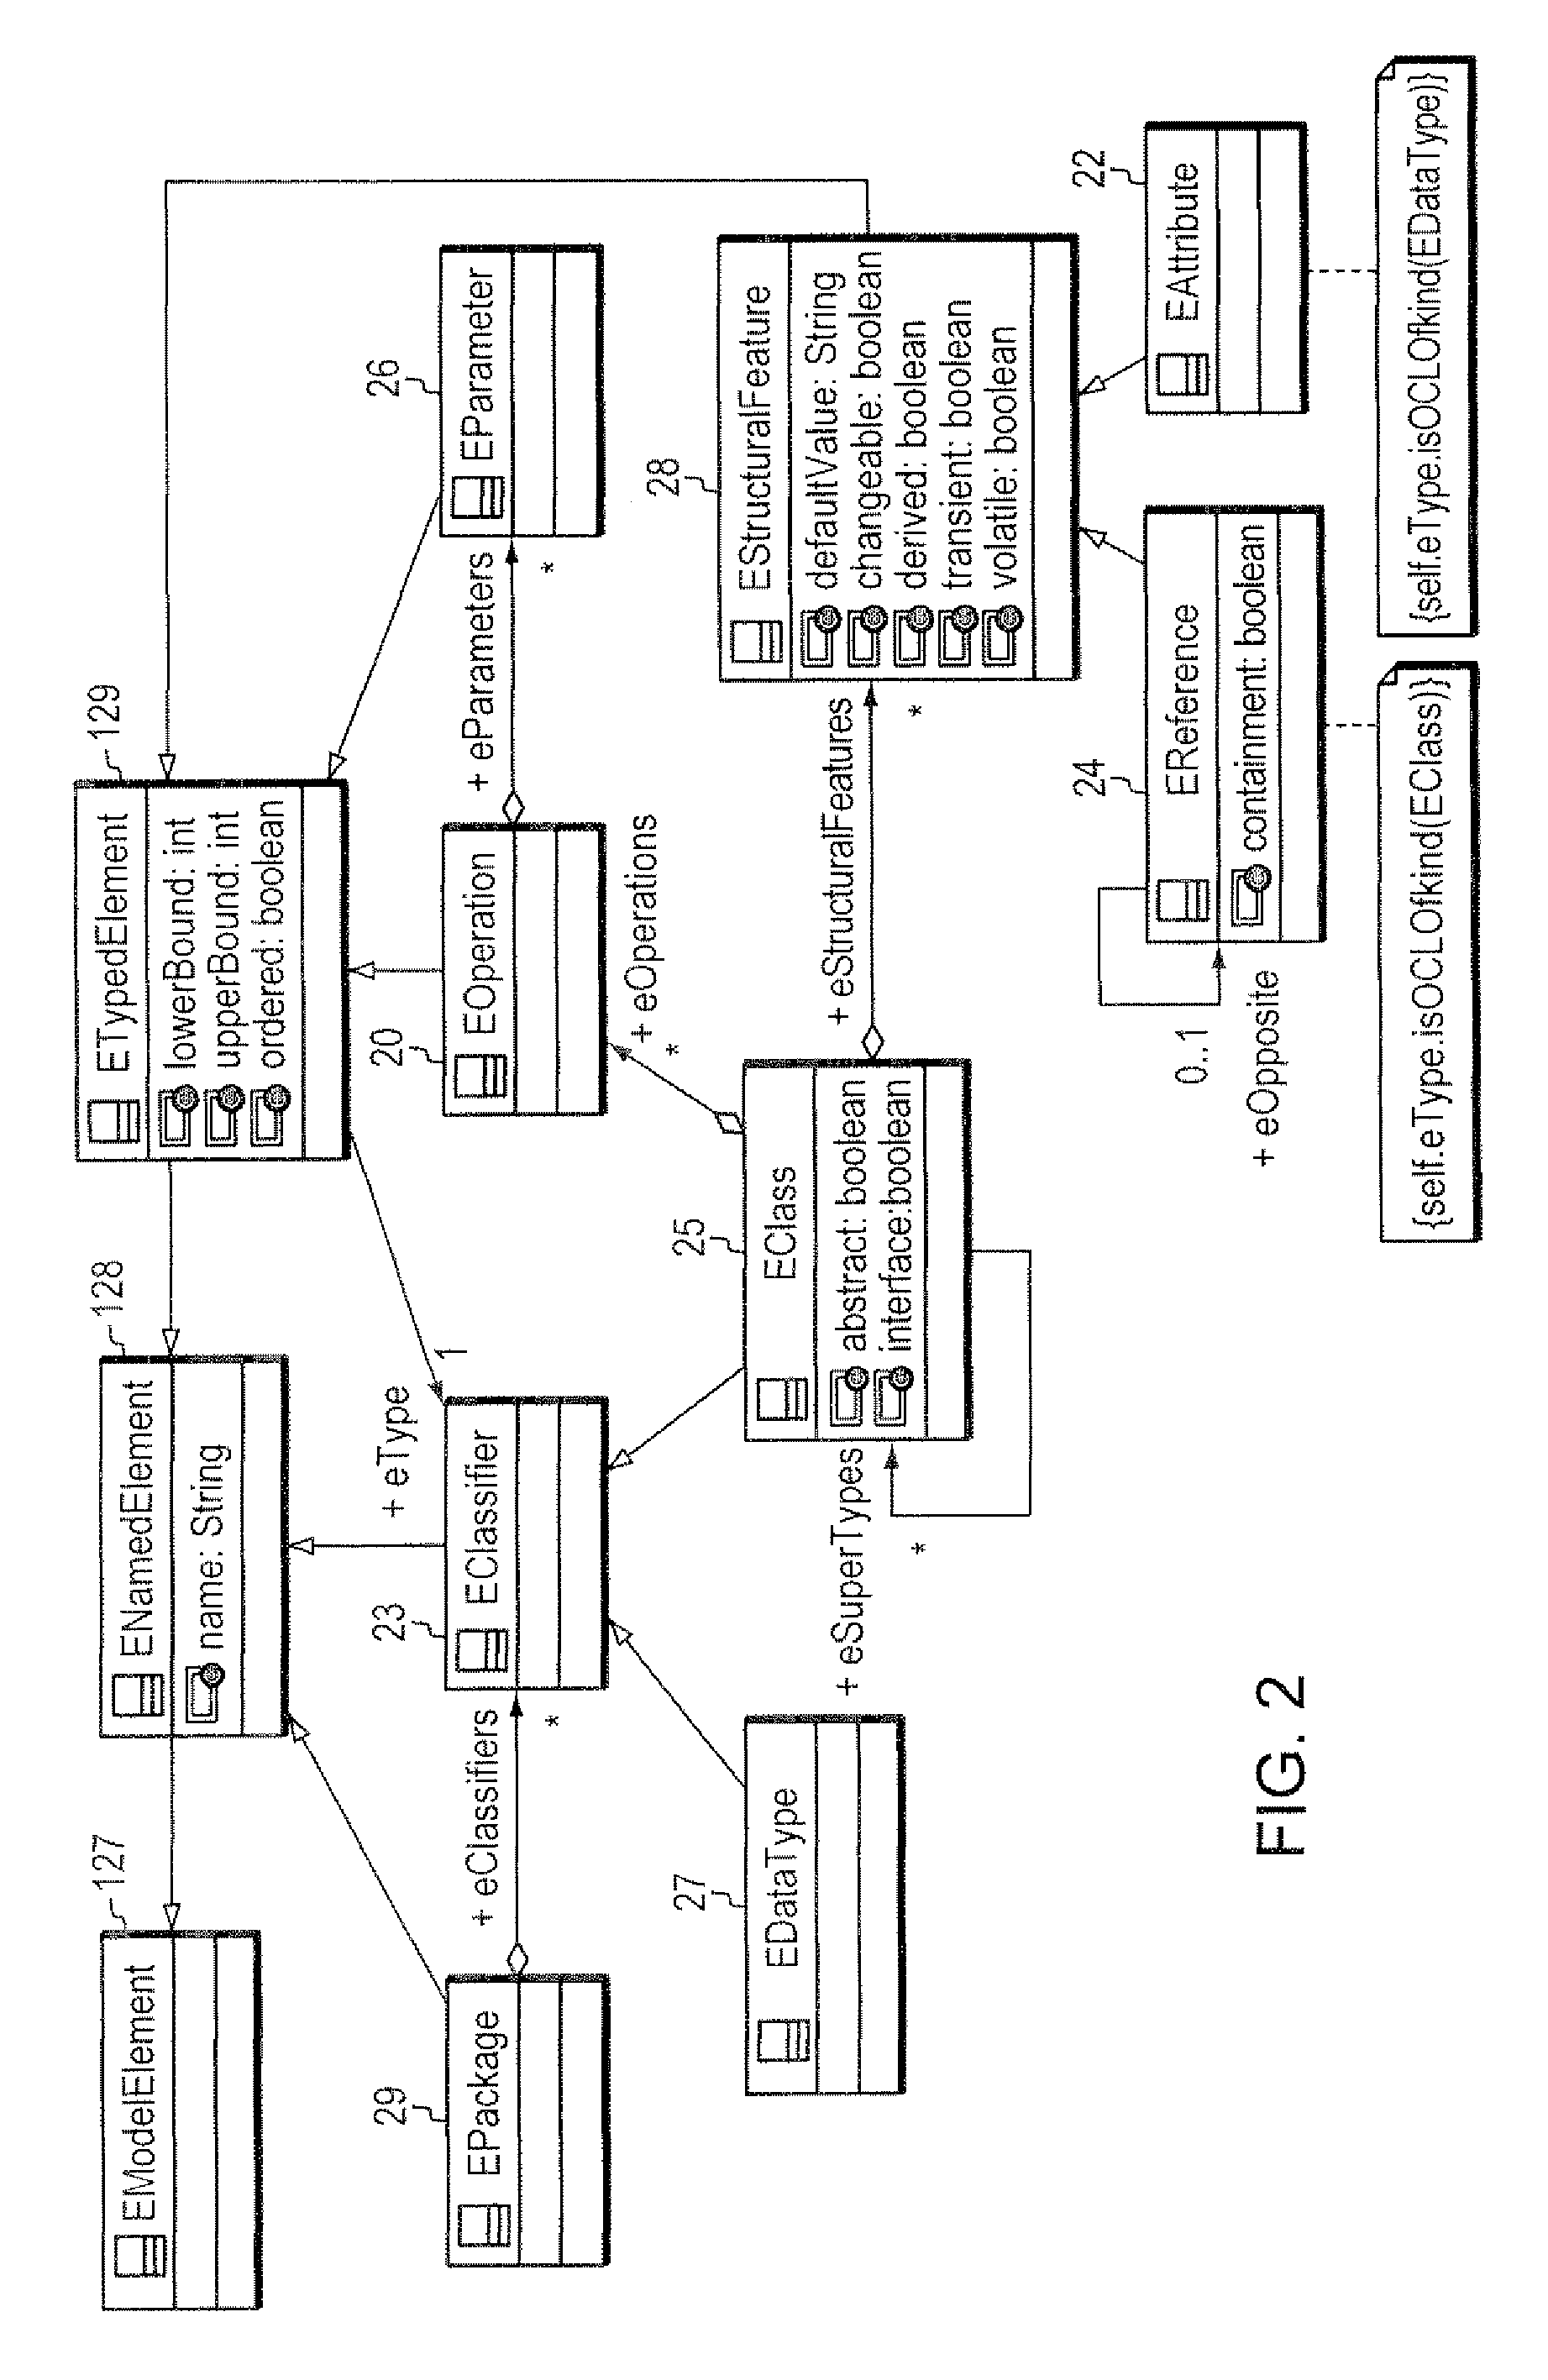 Configurable pattern detection method and apparatus